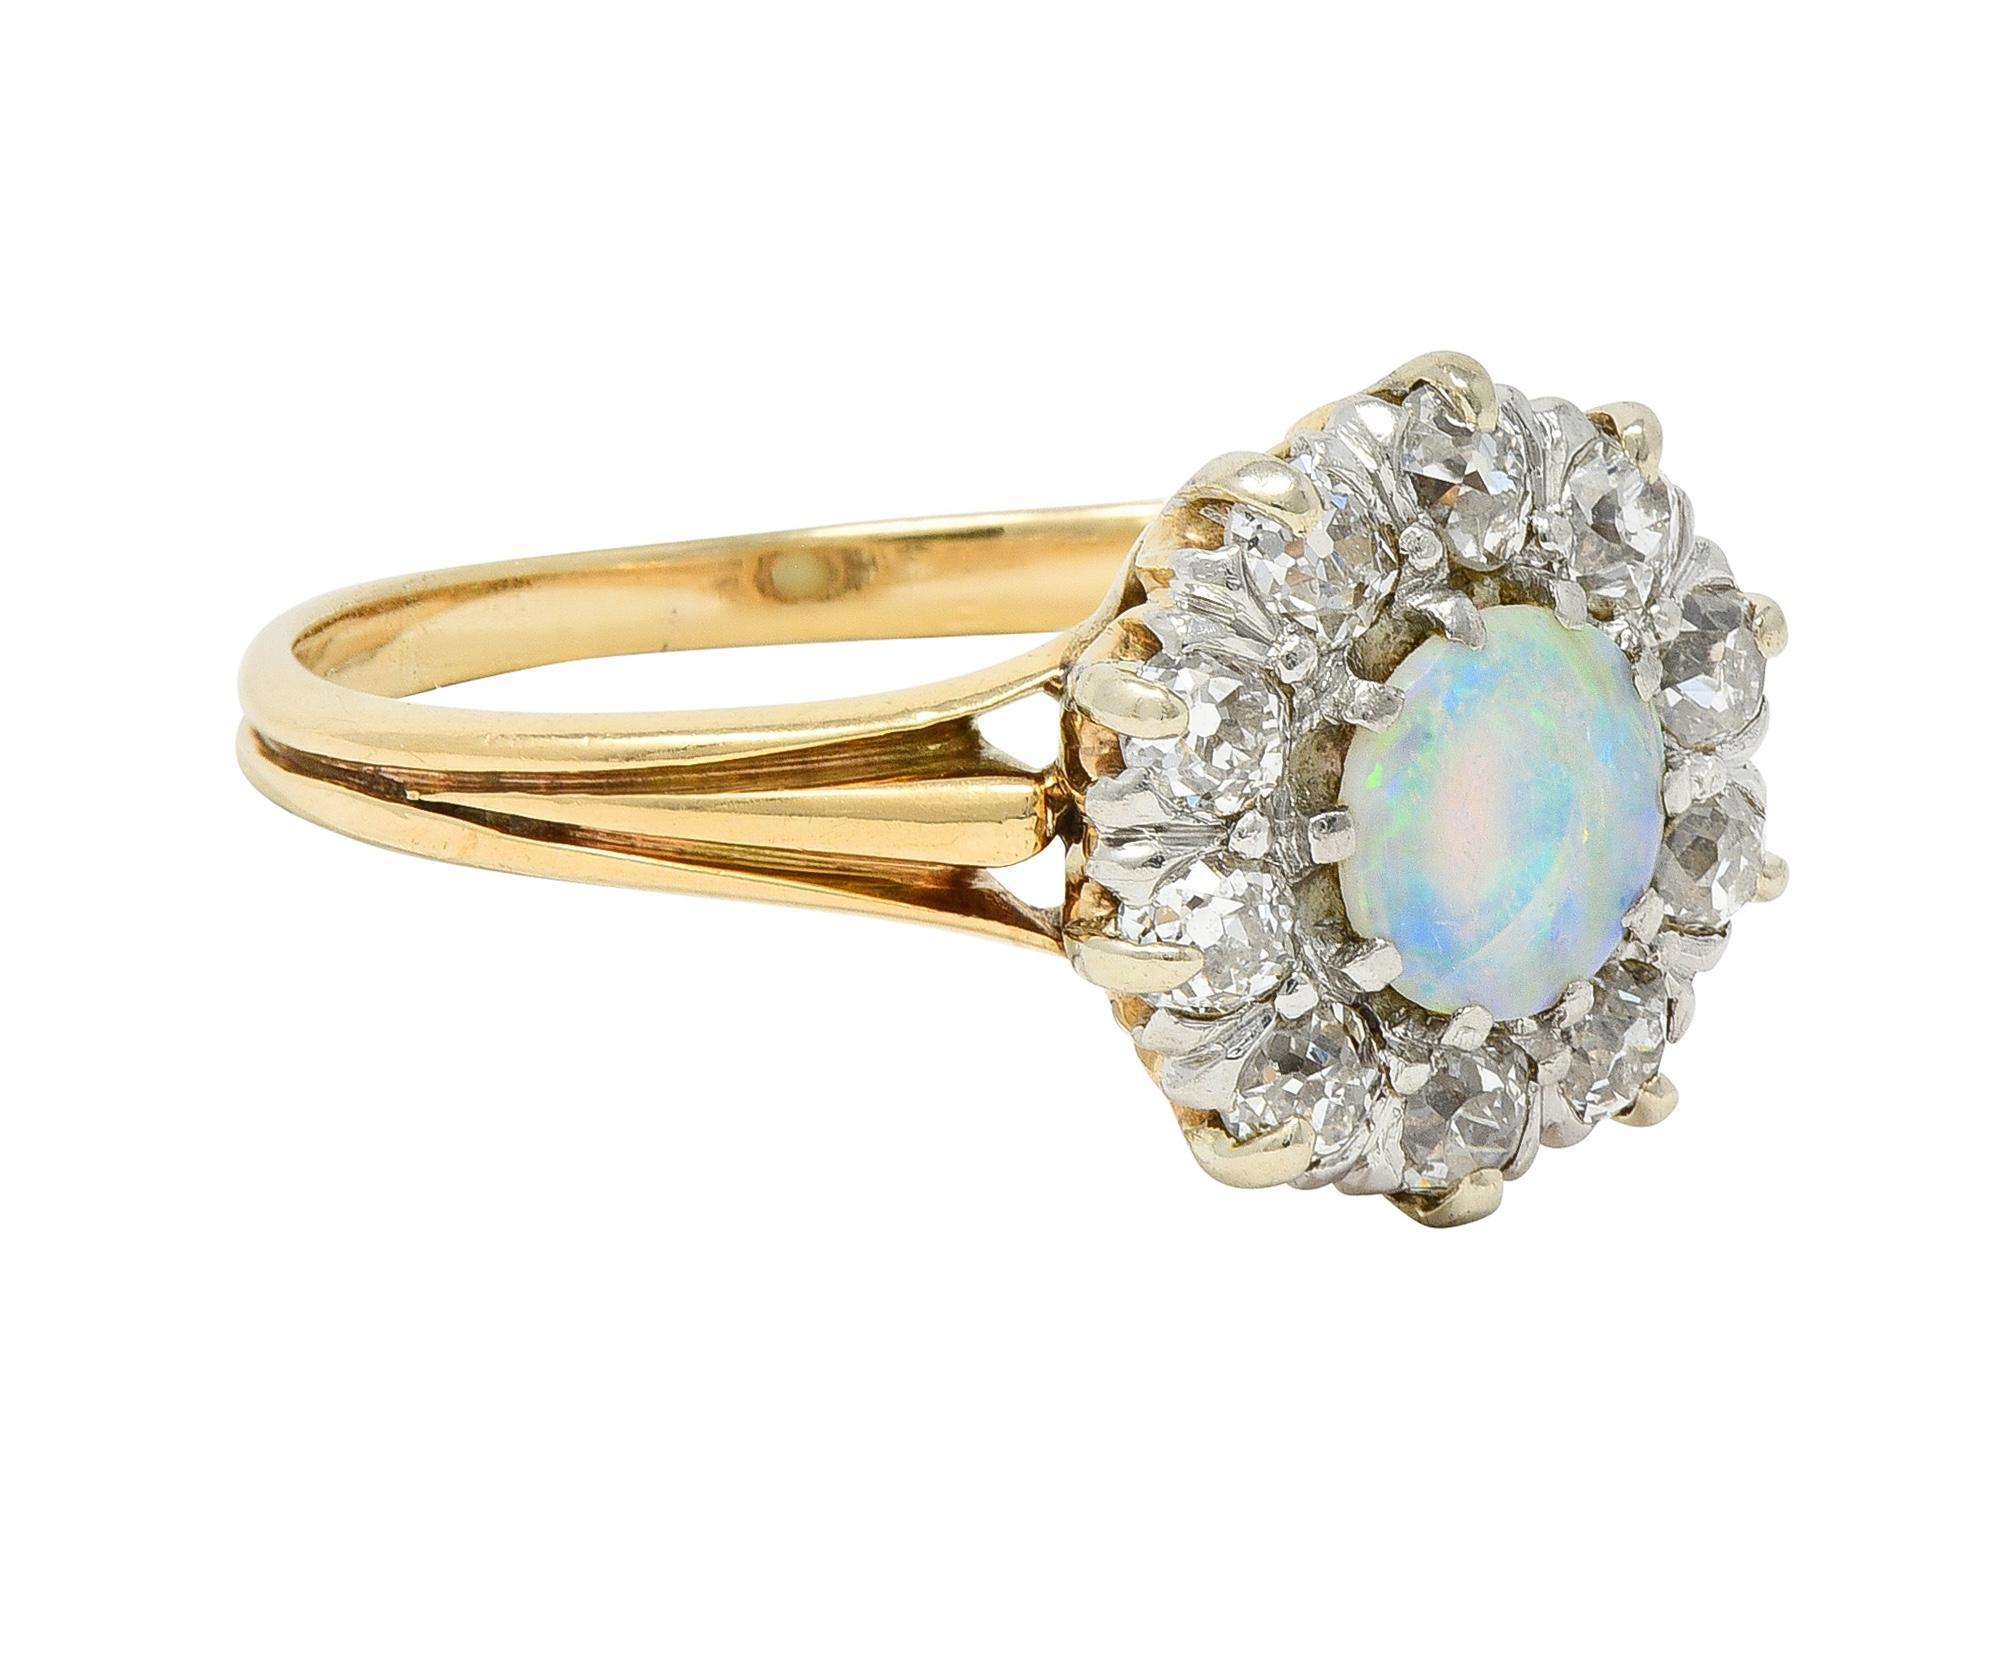 Centering a 4.5 mm round opal cabochon - translucent white with spectral play-of-color
Prong set in a platinum-topped head with a halo surround of old European cut diamonds
Weighing approximately 0.40 carat total - eye clean and bright
Prong set and